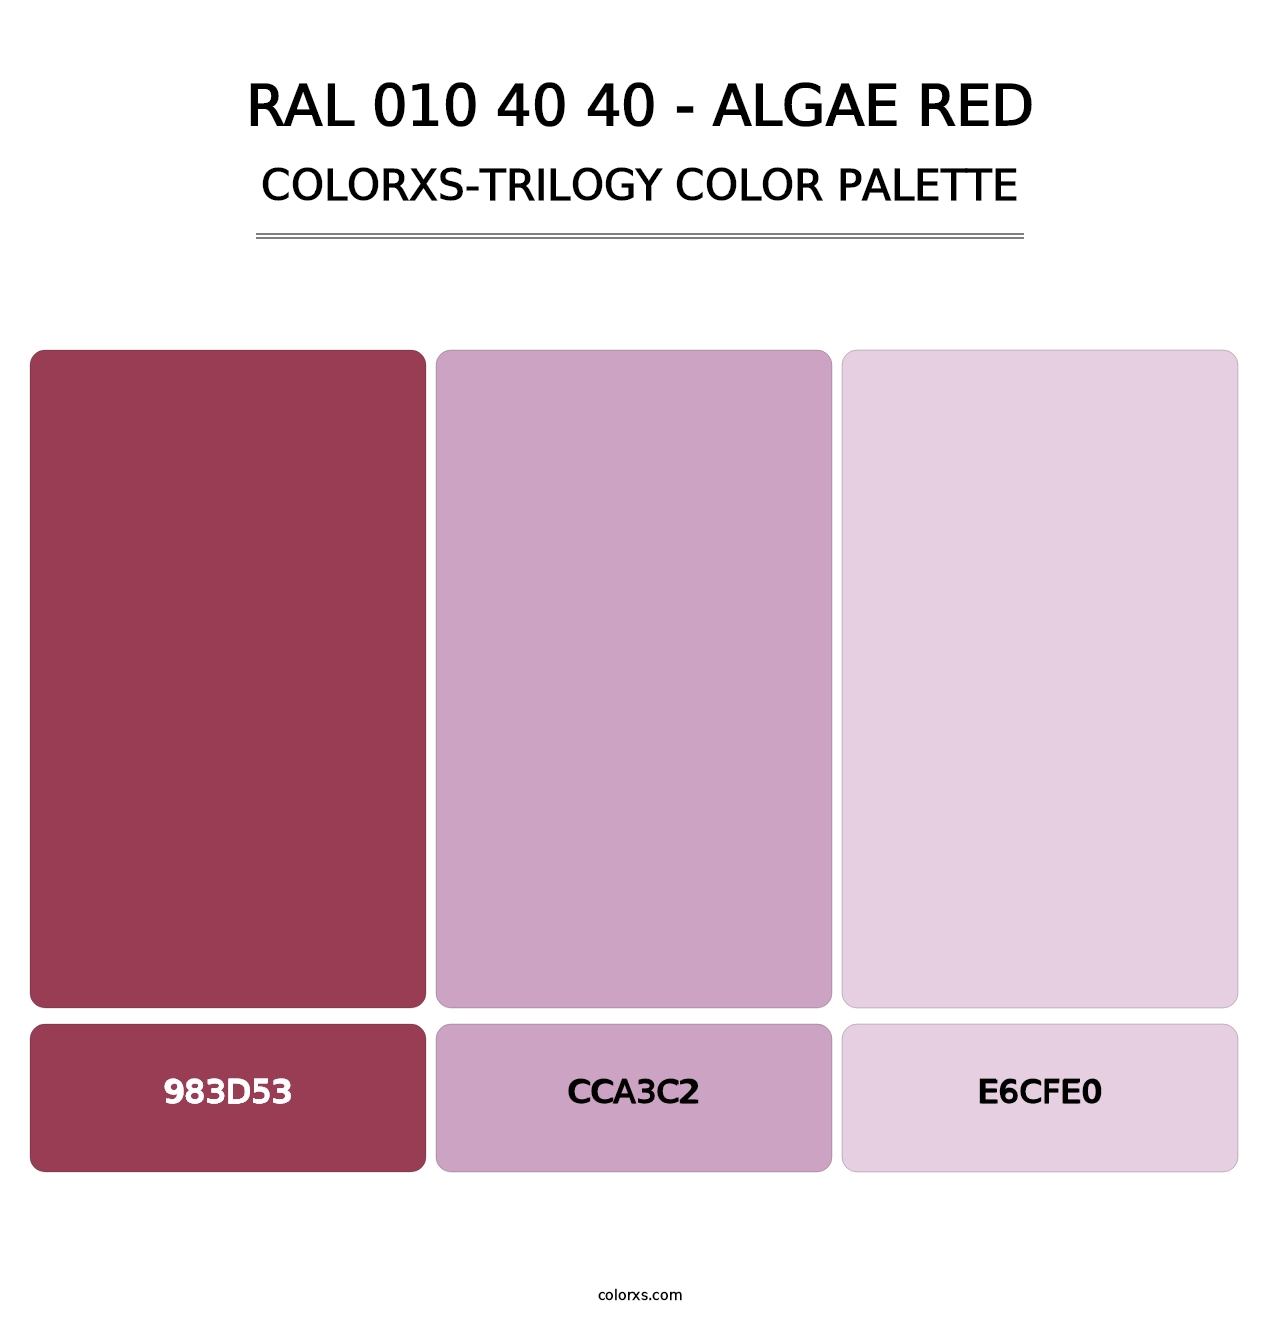 RAL 010 40 40 - Algae Red - Colorxs Trilogy Palette